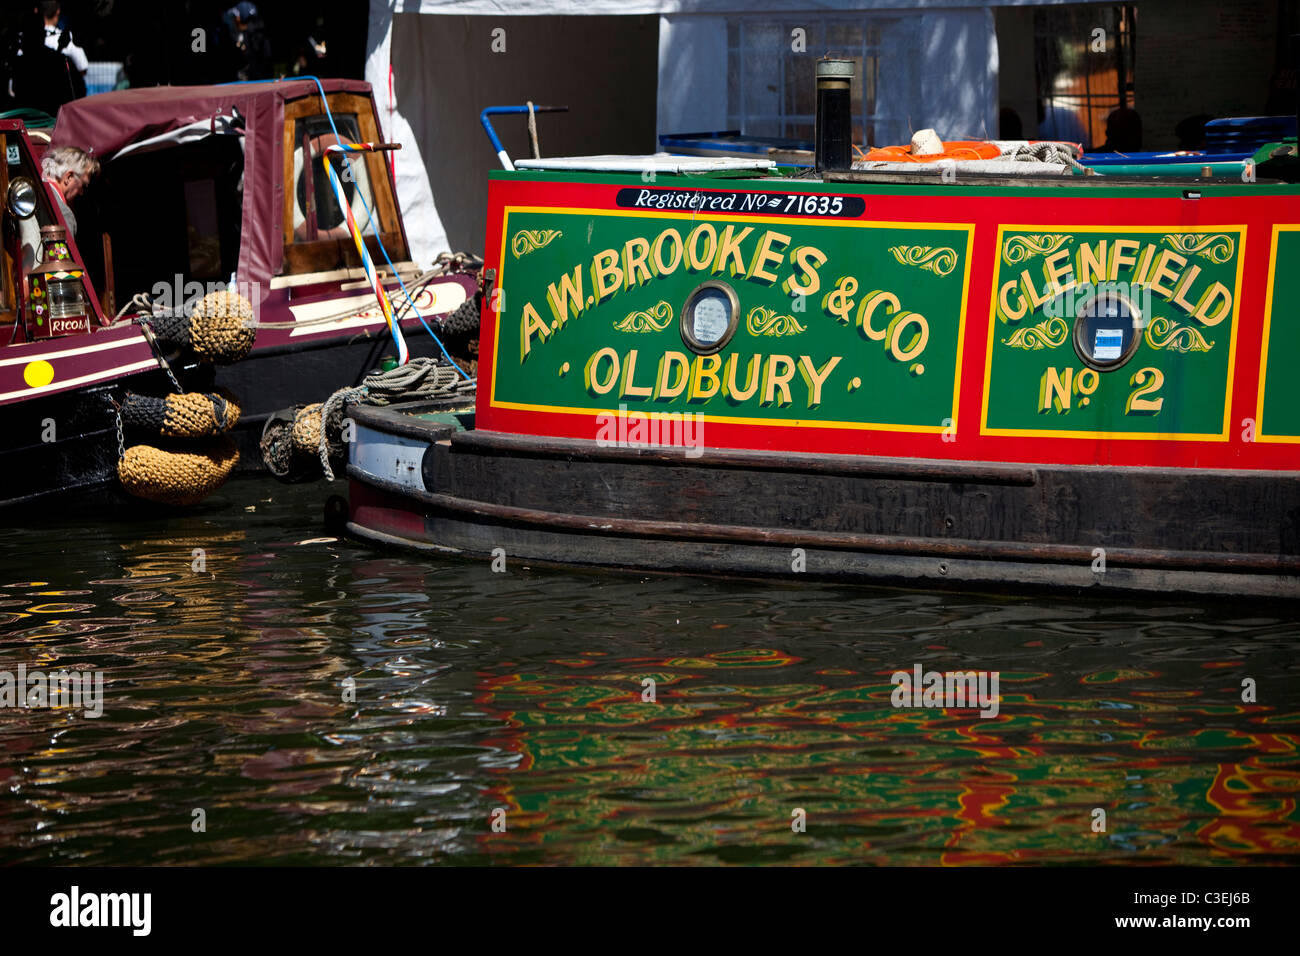 Narrowboat, with a painted sign on it, docked in Regent's Canal at Little Venice, London, England, UK Stock Photo